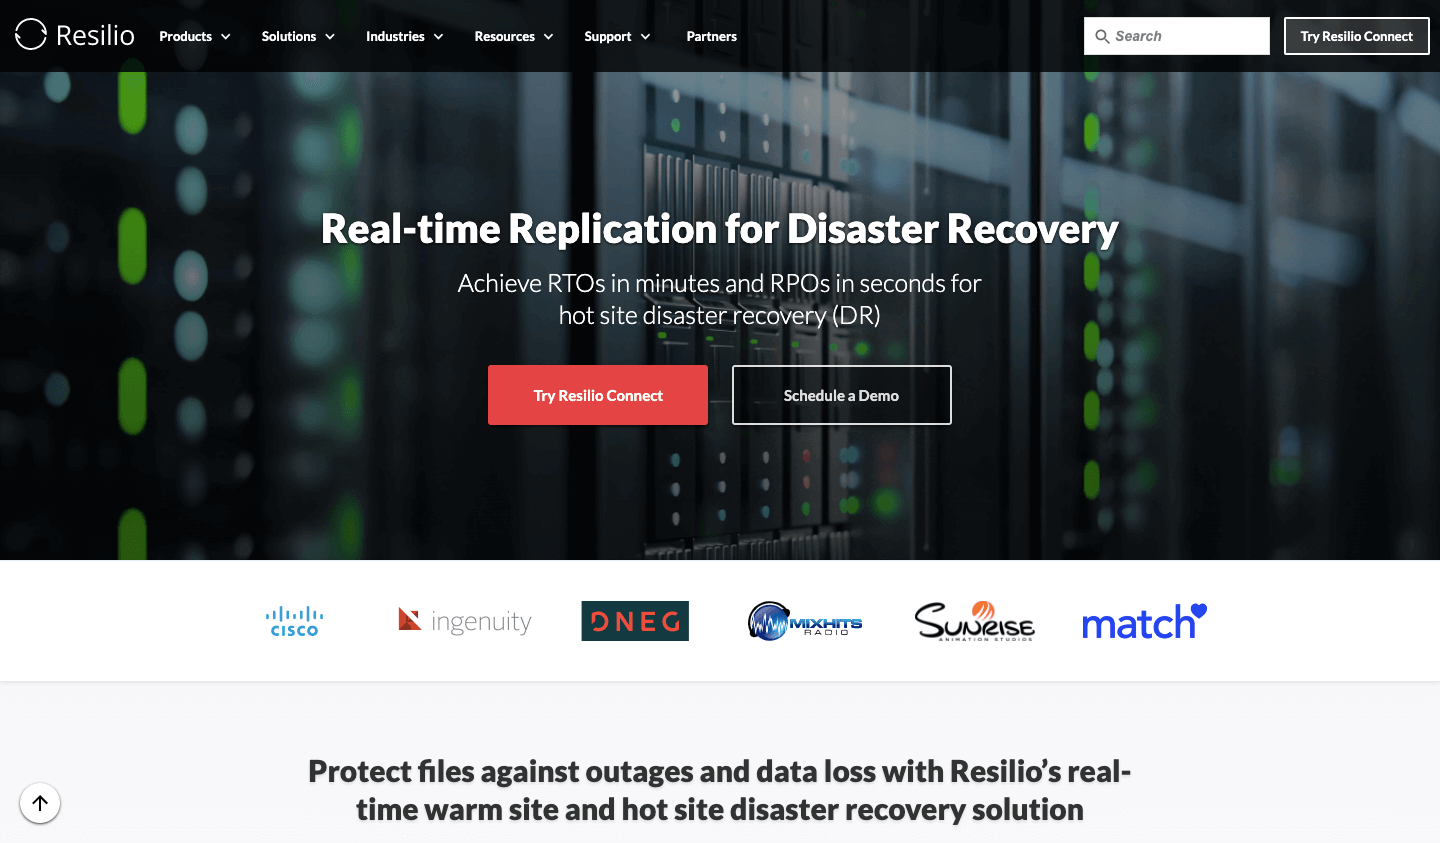 Resilio's cloud disaster recovery solution